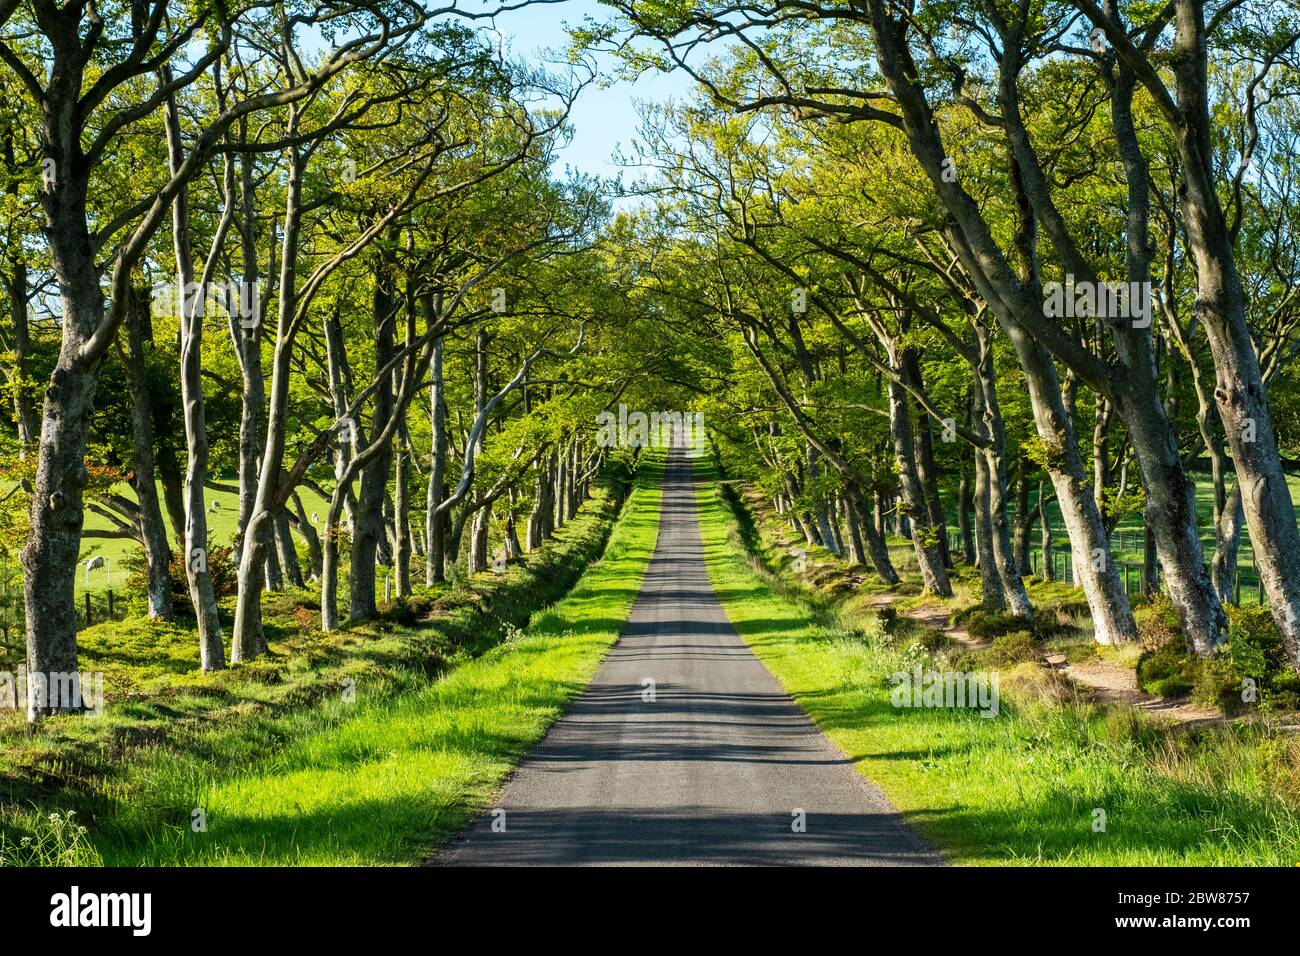 The tree-lined avenue which act as an access road to the Pentland Hills Regional park, near Balerno, Midlothian, Scotland. Stock Photo